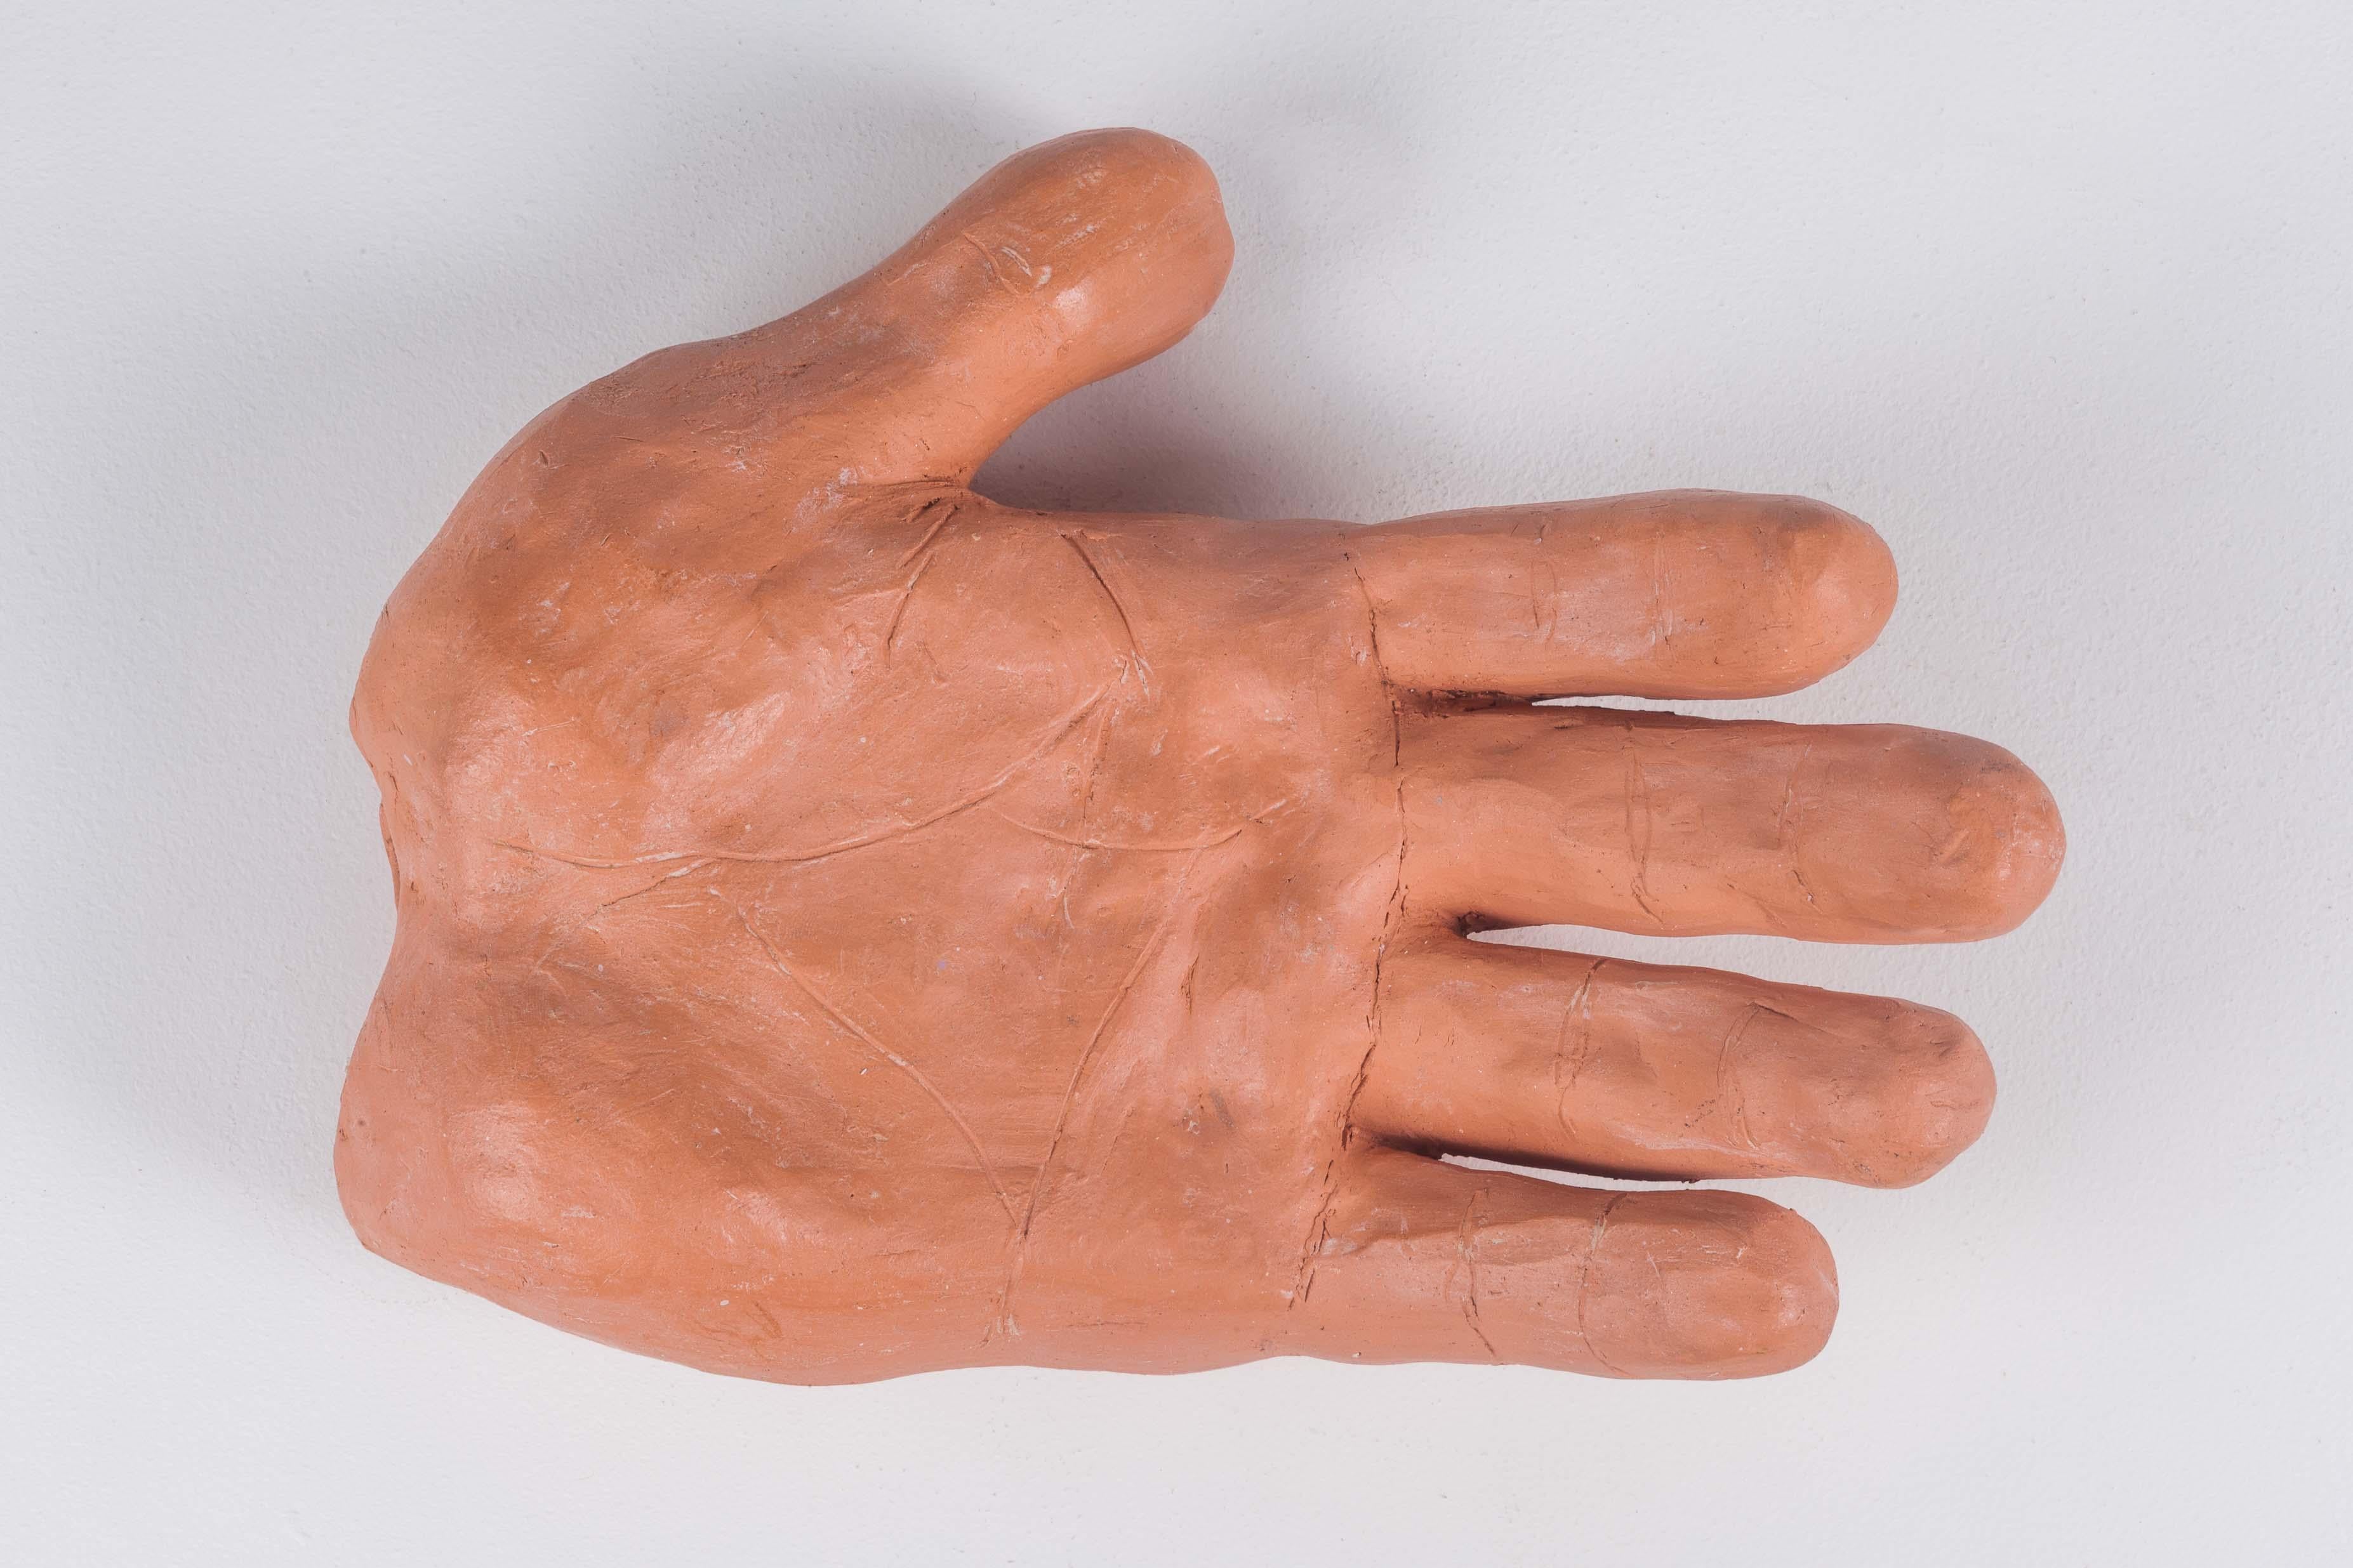 Handmade large pink hand sculpture/catchall by unknown American artist. Oversized, goofy and in your face. The soft touch of clay adds some life to that hand straight out of a comic book. A decorative American studio pottery piece, and a functional